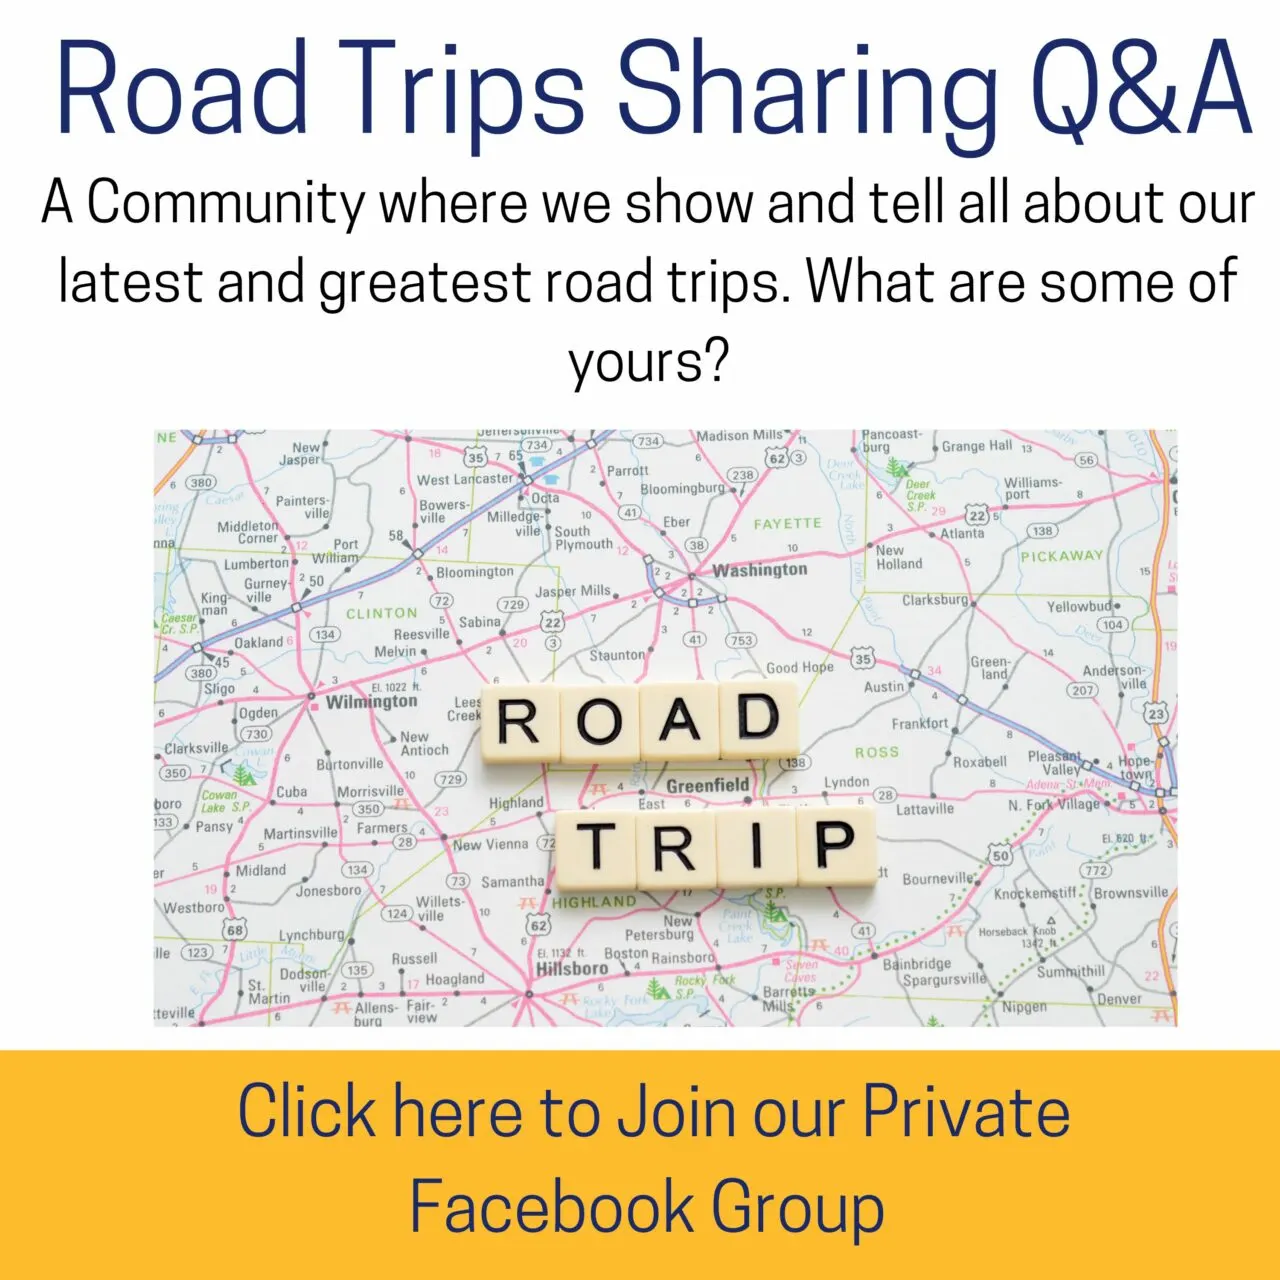 Road Trips Sharing with questions and answers - a Facebook group.